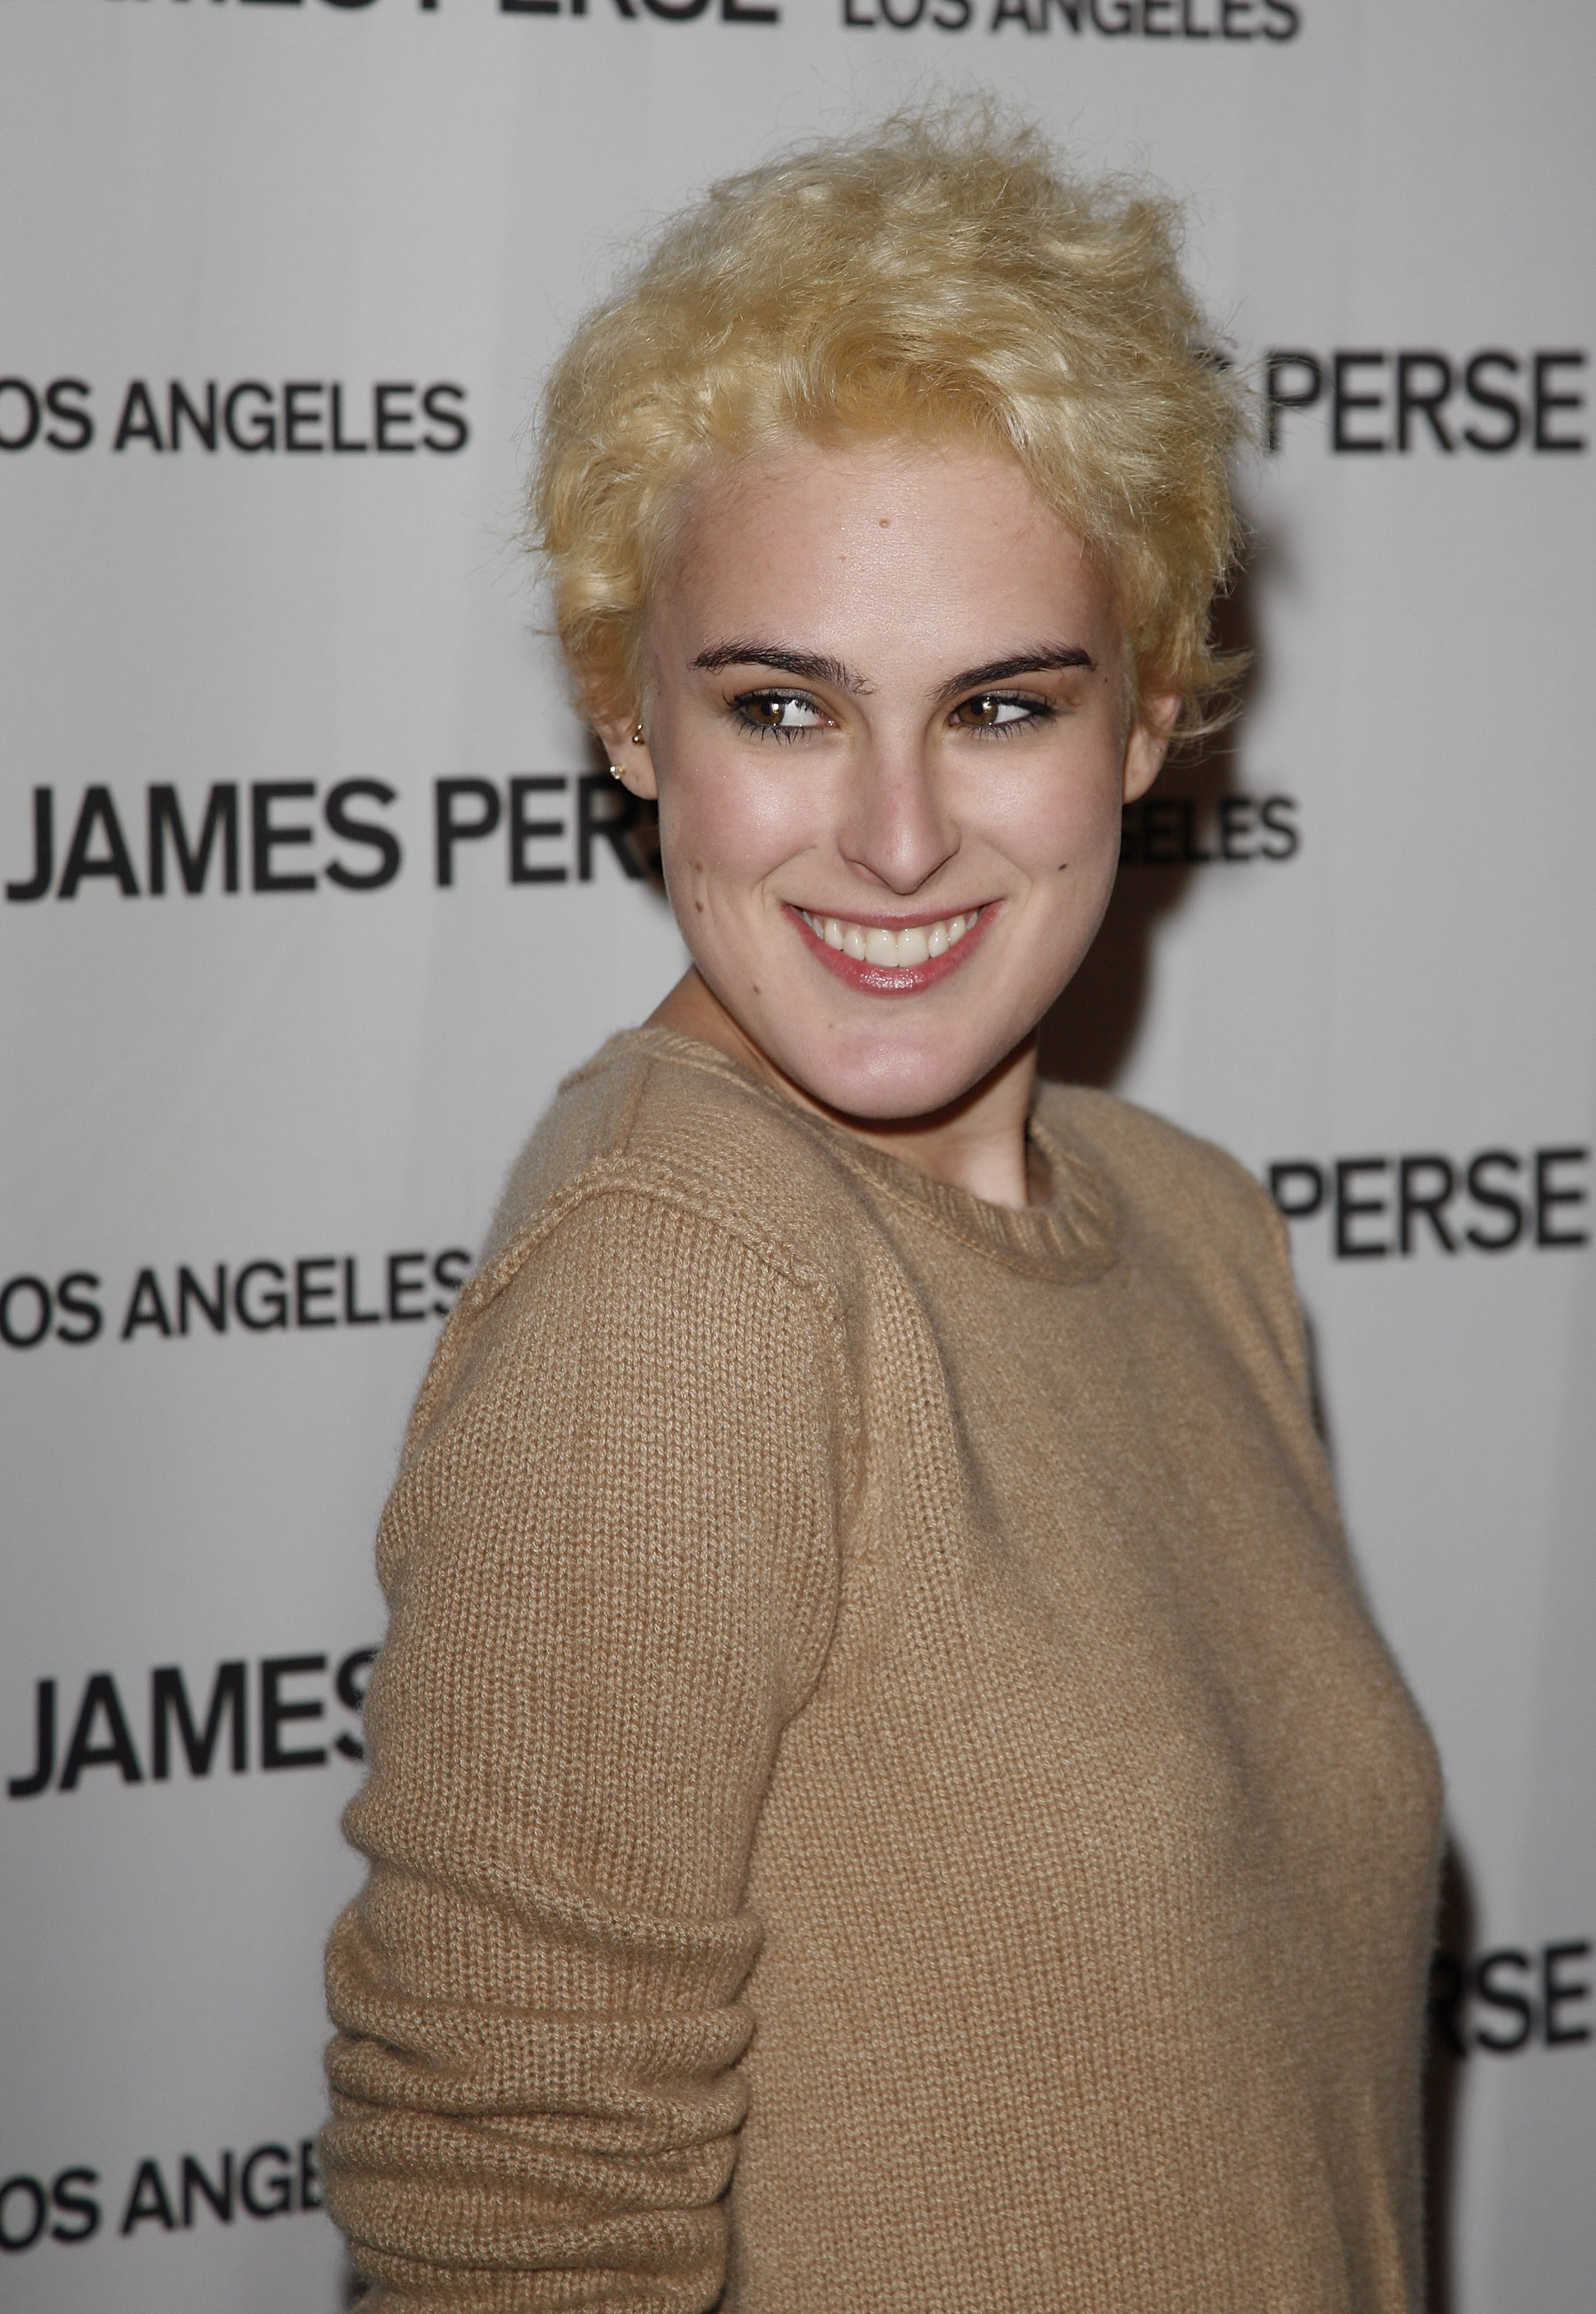 Rumer Willis arrives at the James Perse store opening on September 18, 2007, in Beverly Hills, California. | Source: Getty Images